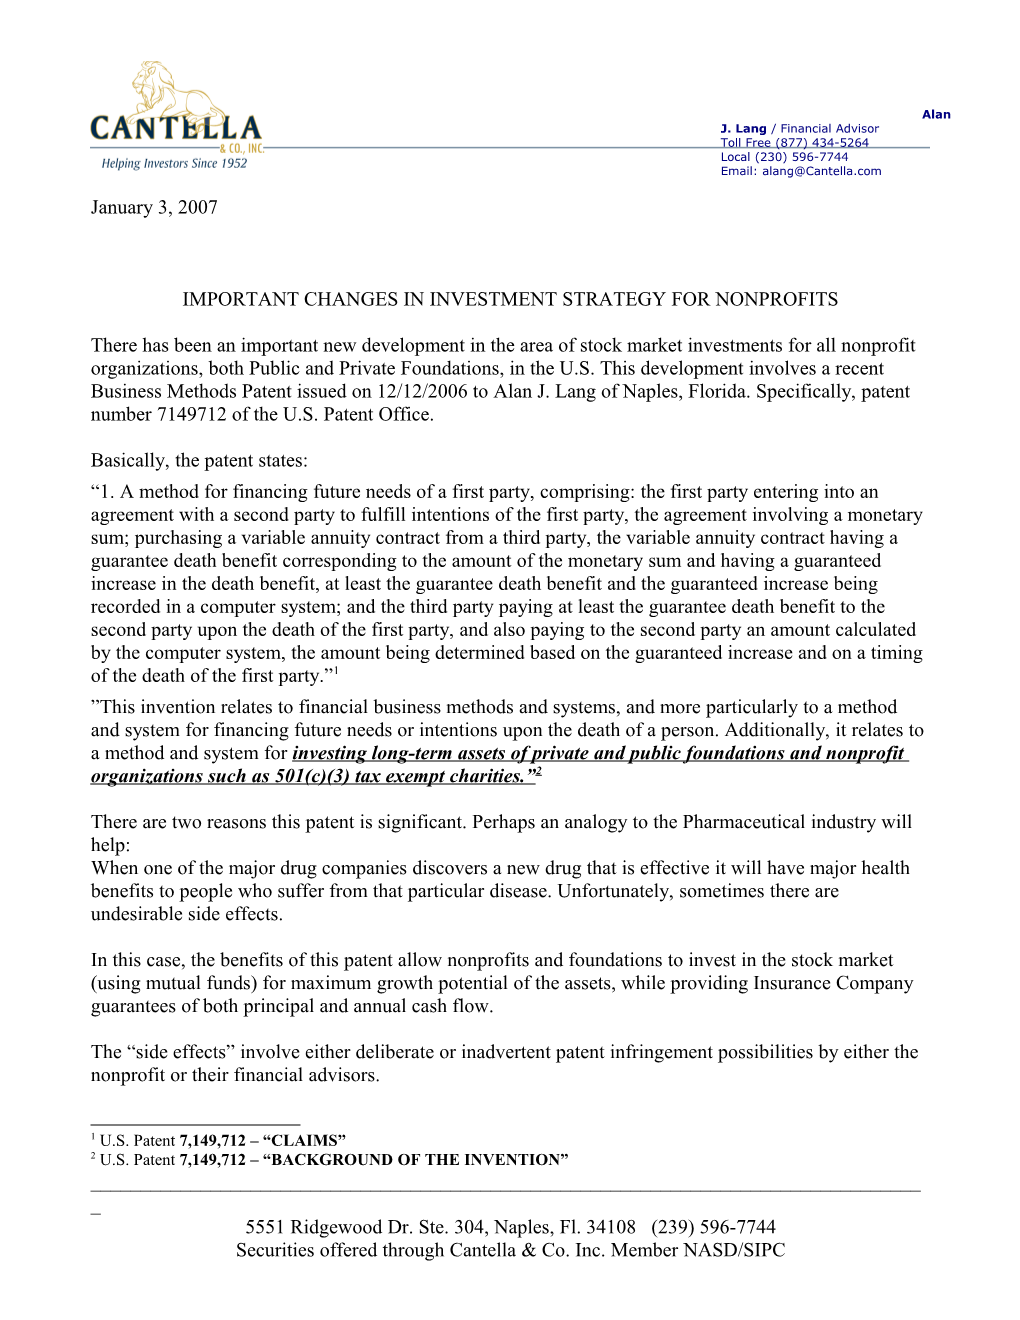 Letter from Alan Lang Warning Practitioners and Taxpayers About His CRT Patent - Jan. 3, 2007